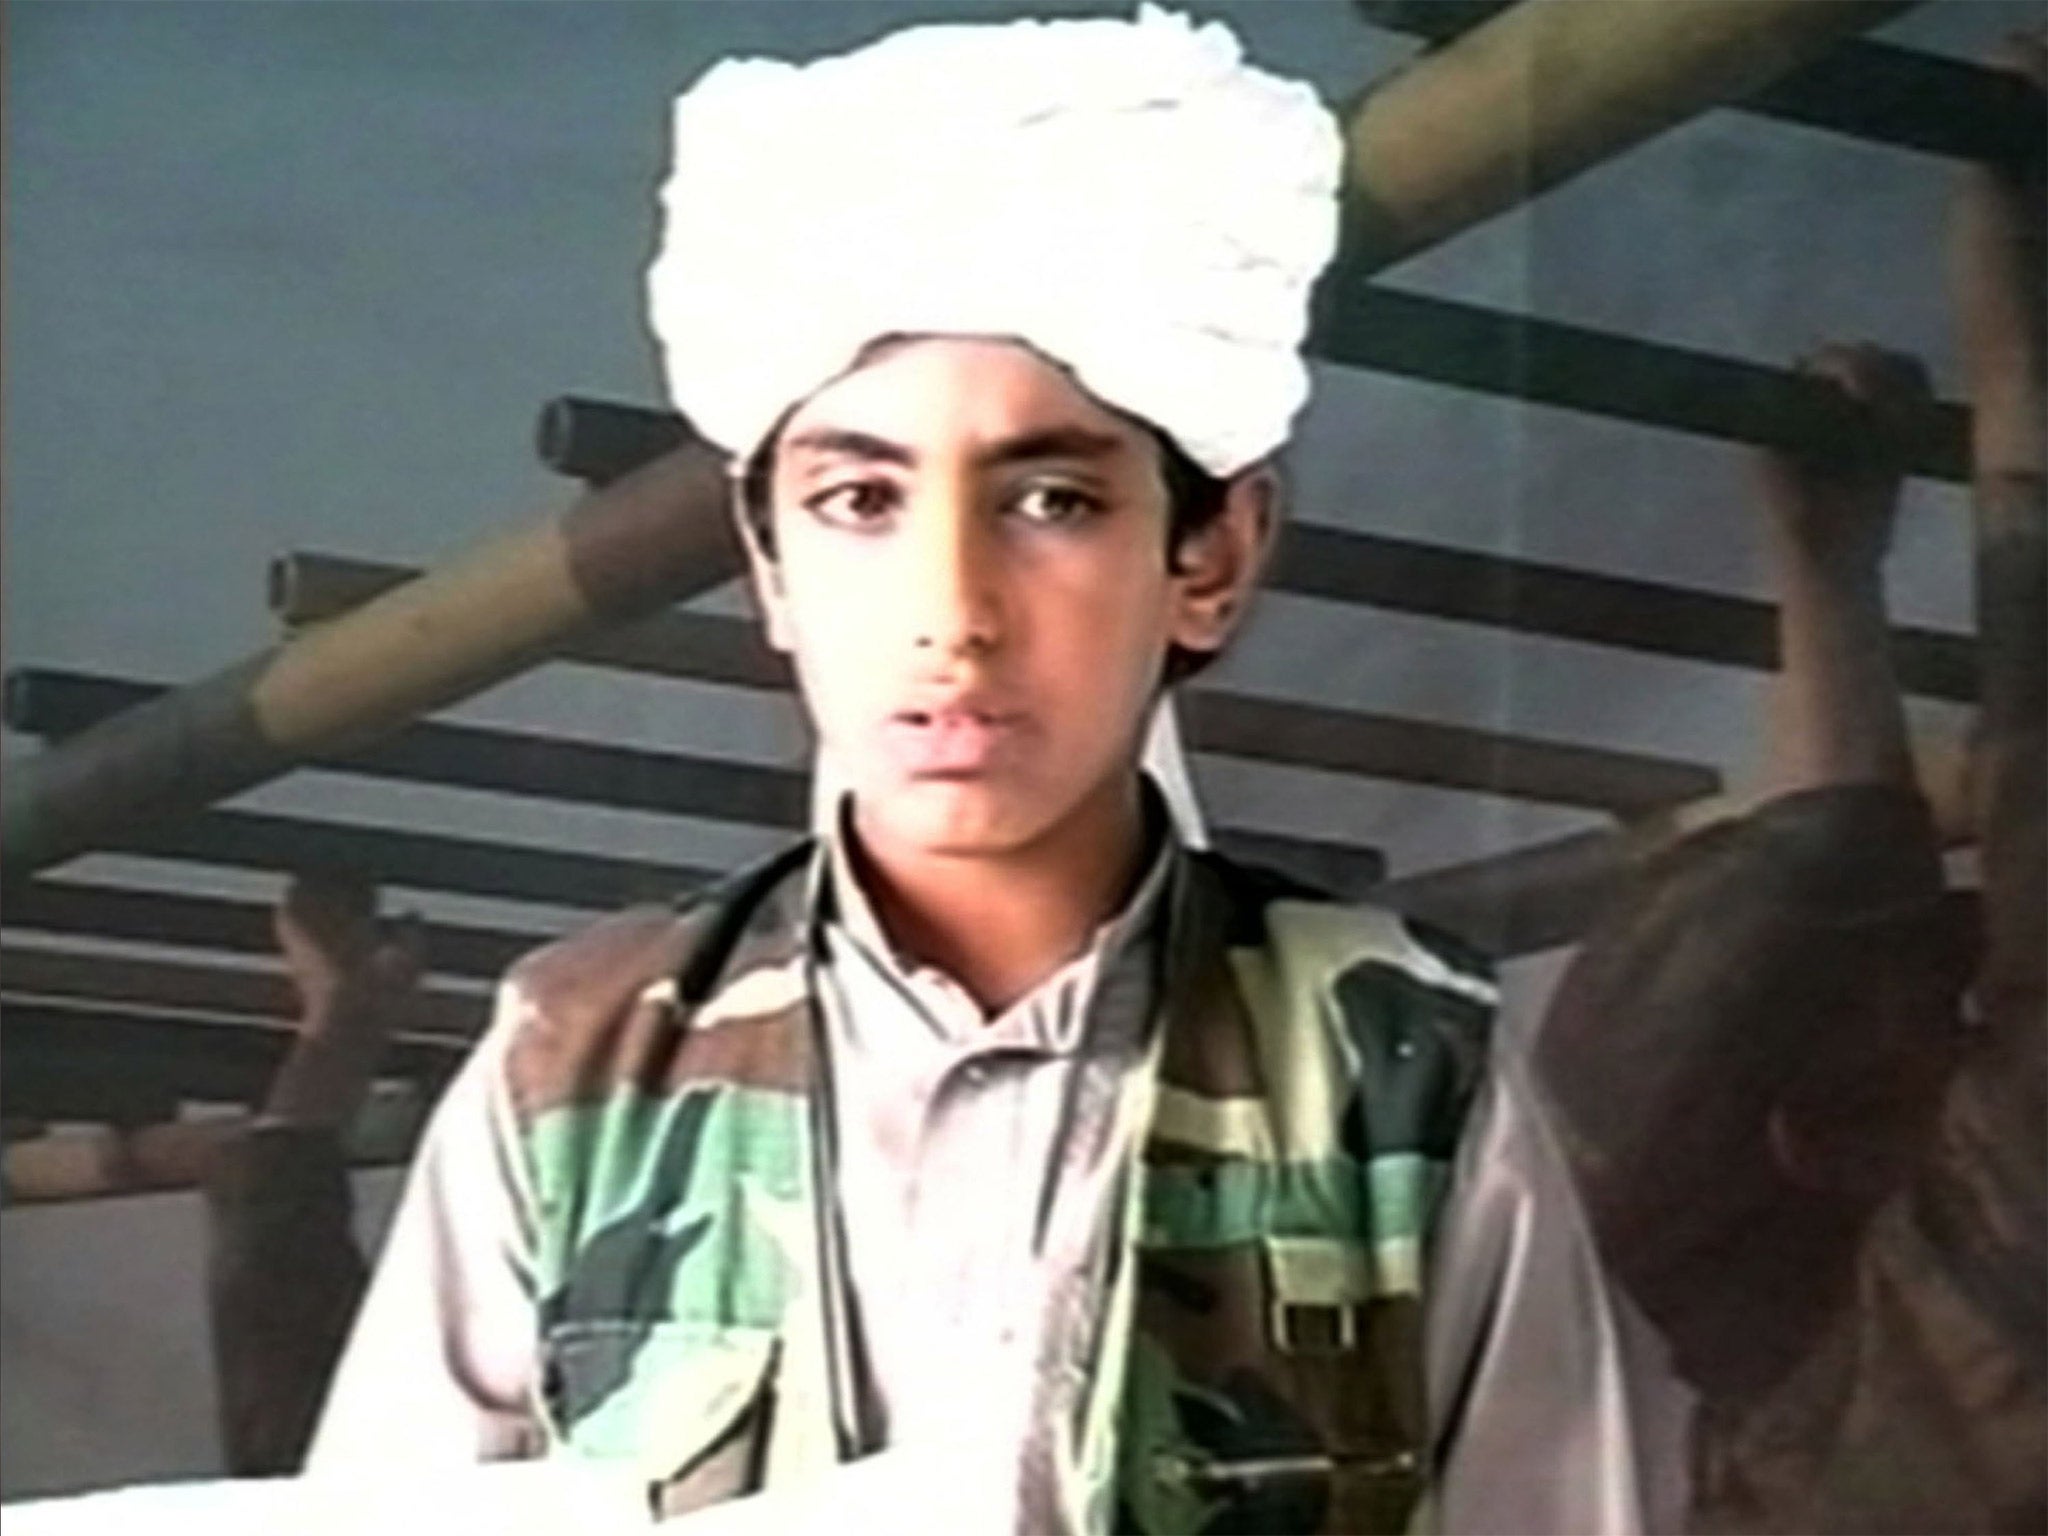 Bin Laden hoped his son Hamza would eventually succeed him